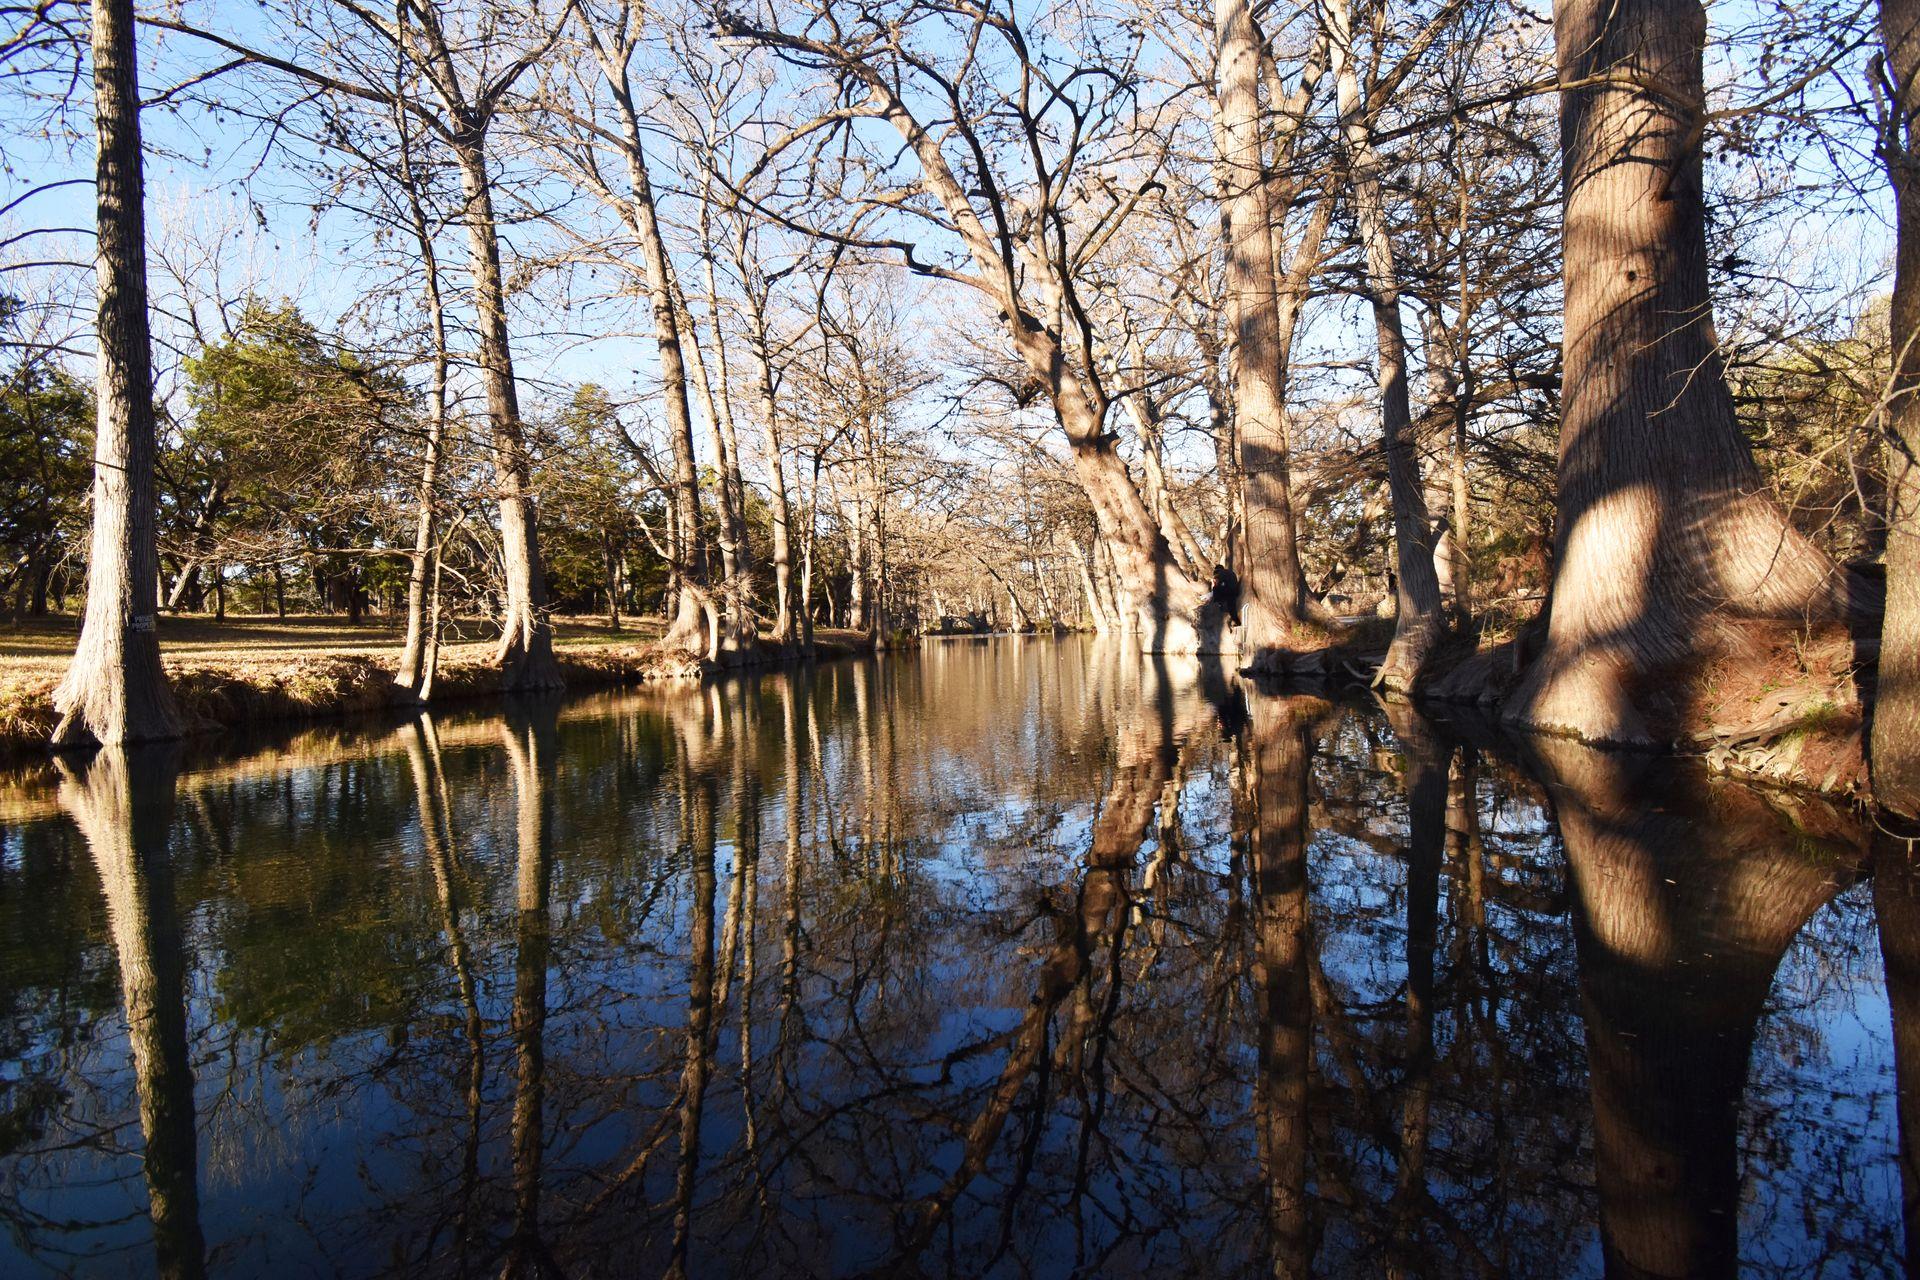 A view of the water surrounding by cypress trees at Blue Hole Regional Park.